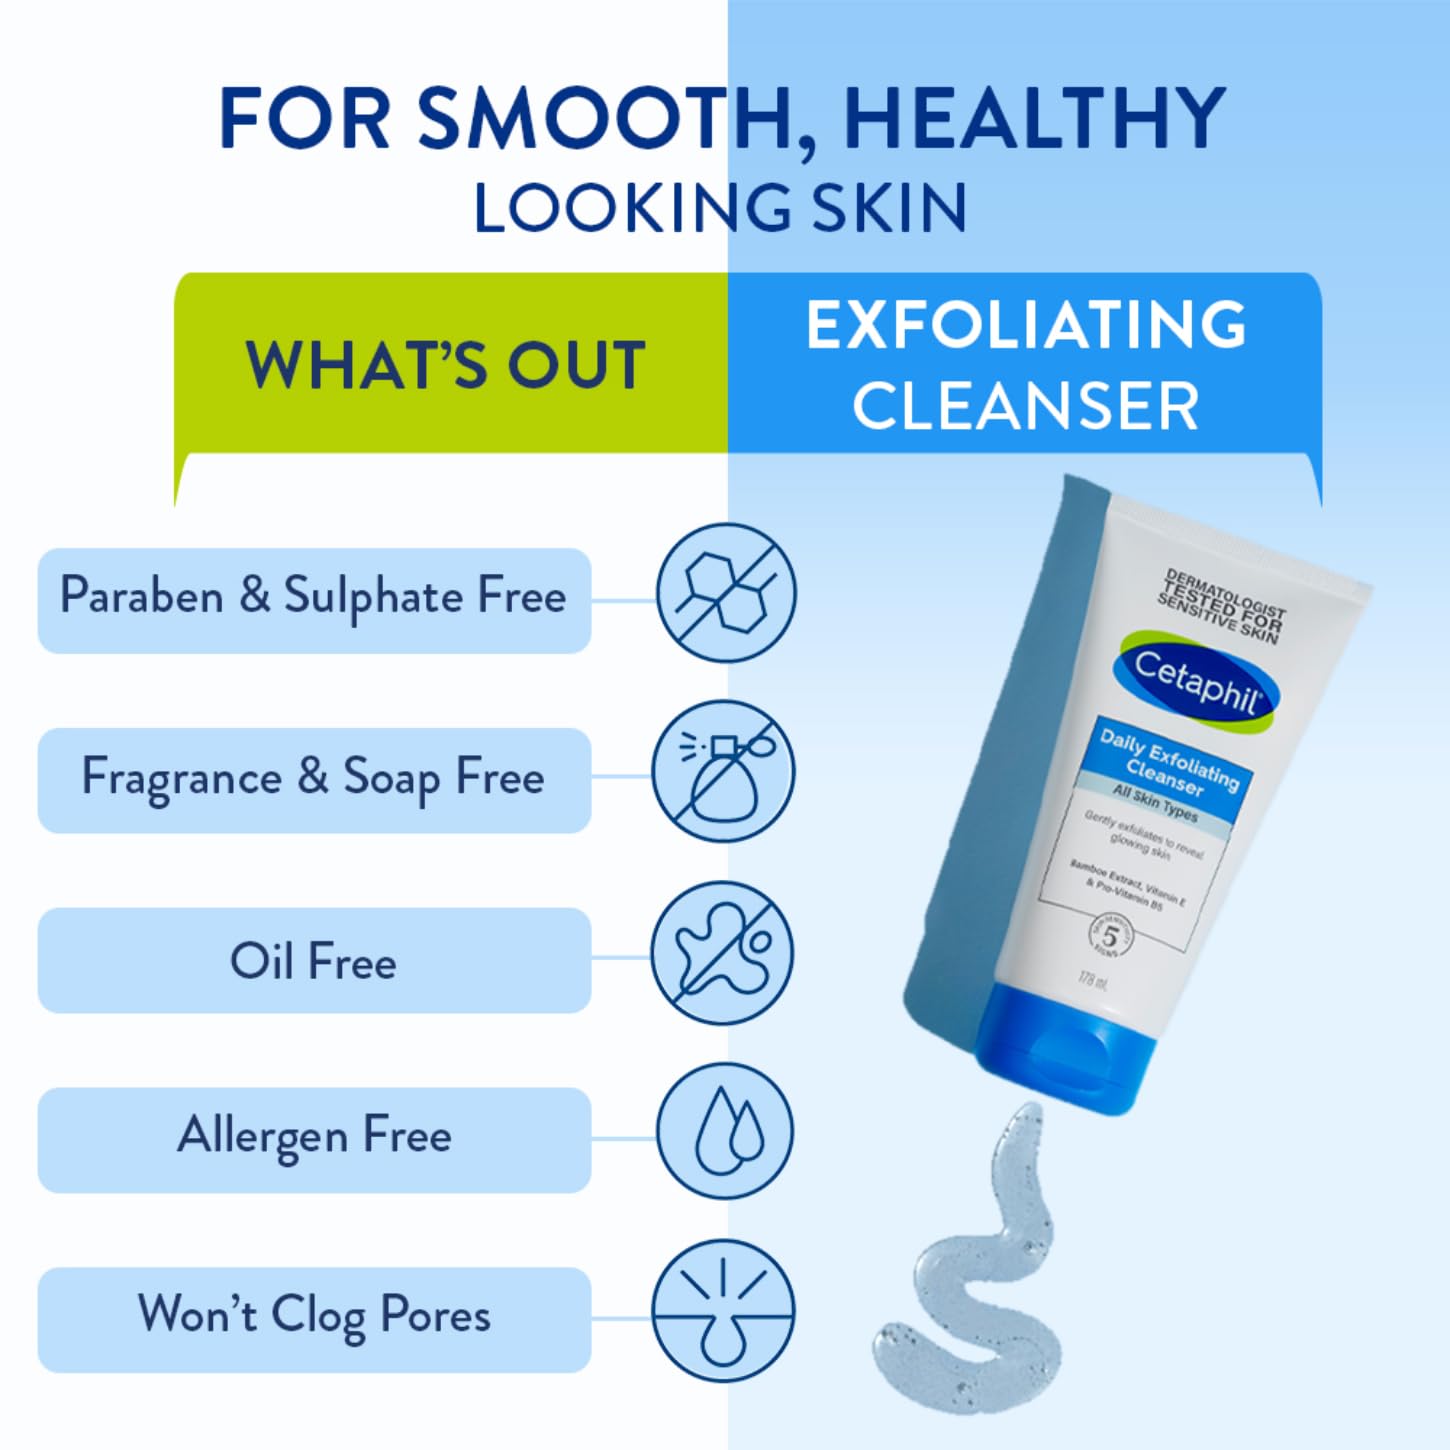 Cetaphil Face Wash Daily Exfoliating Cleanser (178ml)